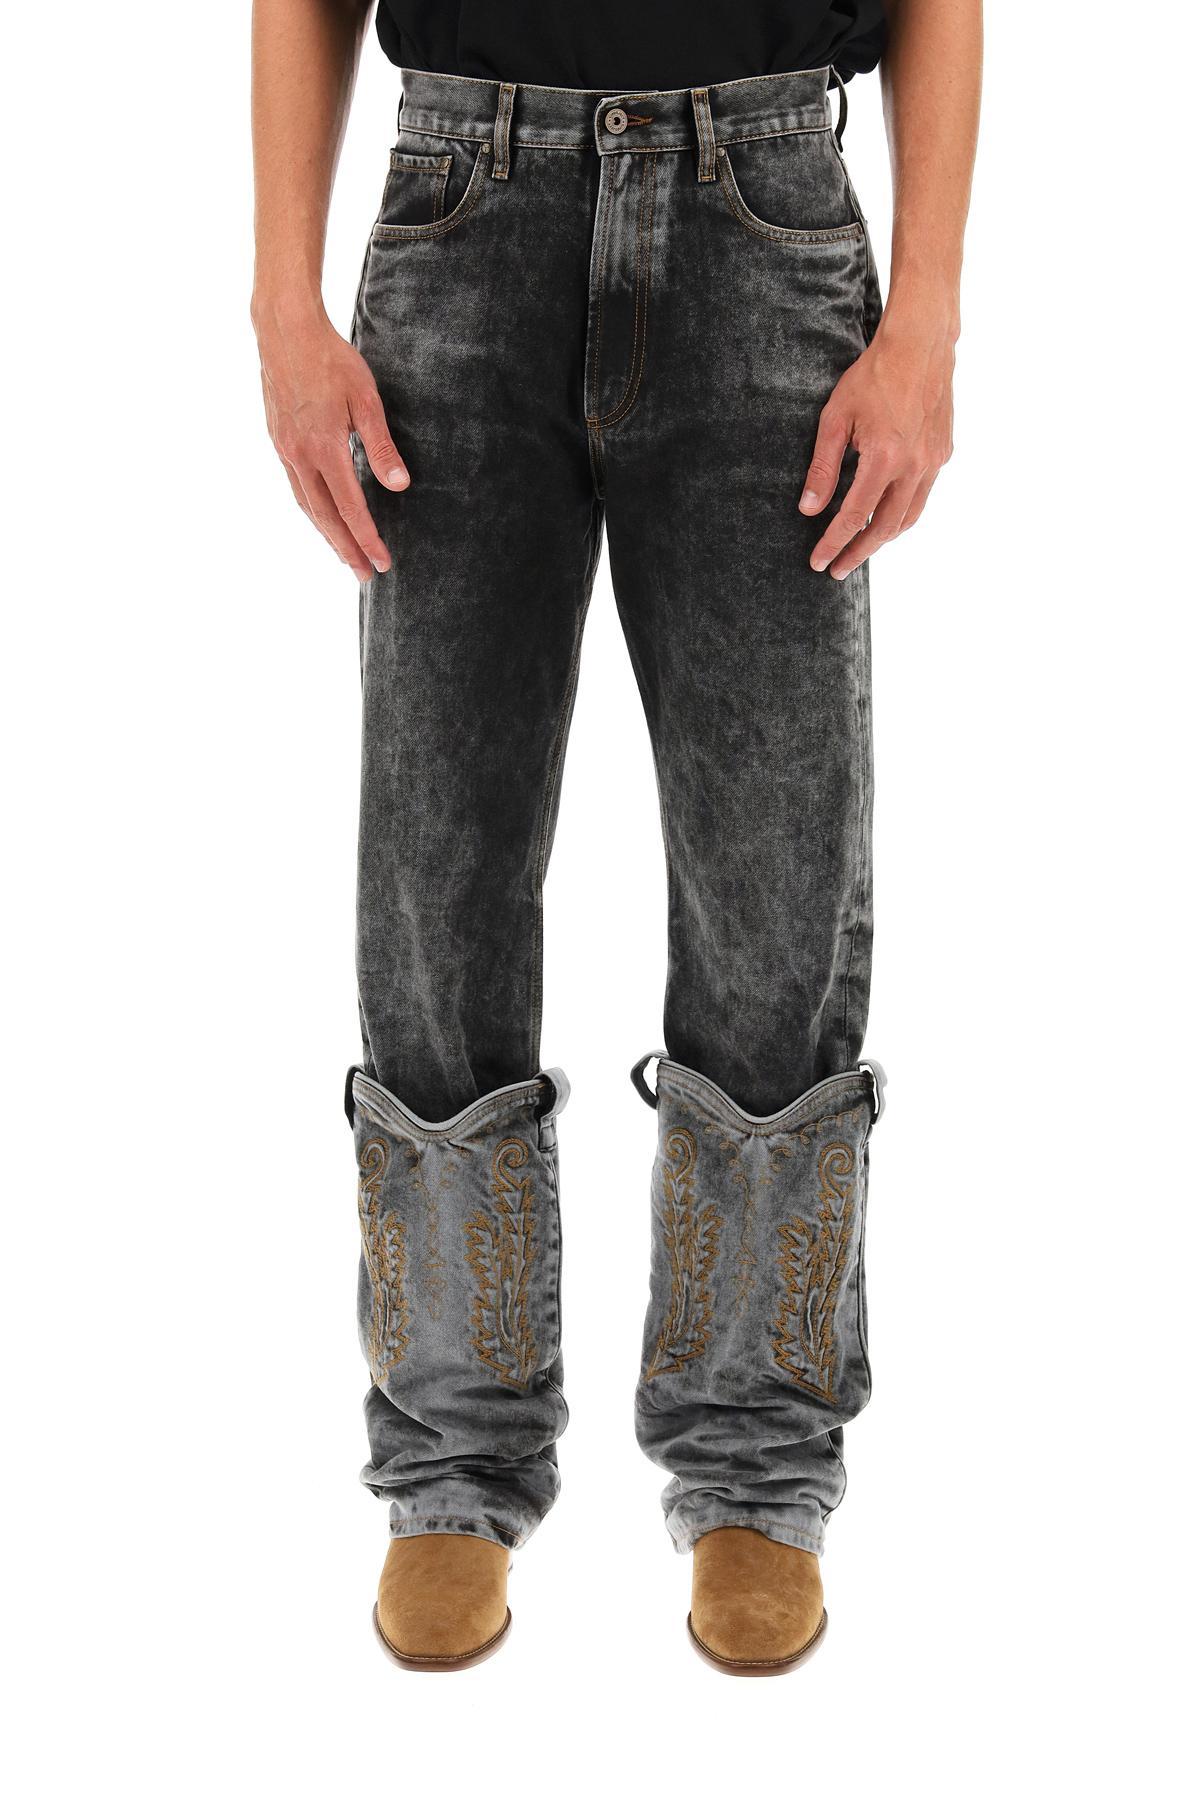 Y. Project Cowboy Cuff Jeans in Black for Men | Lyst